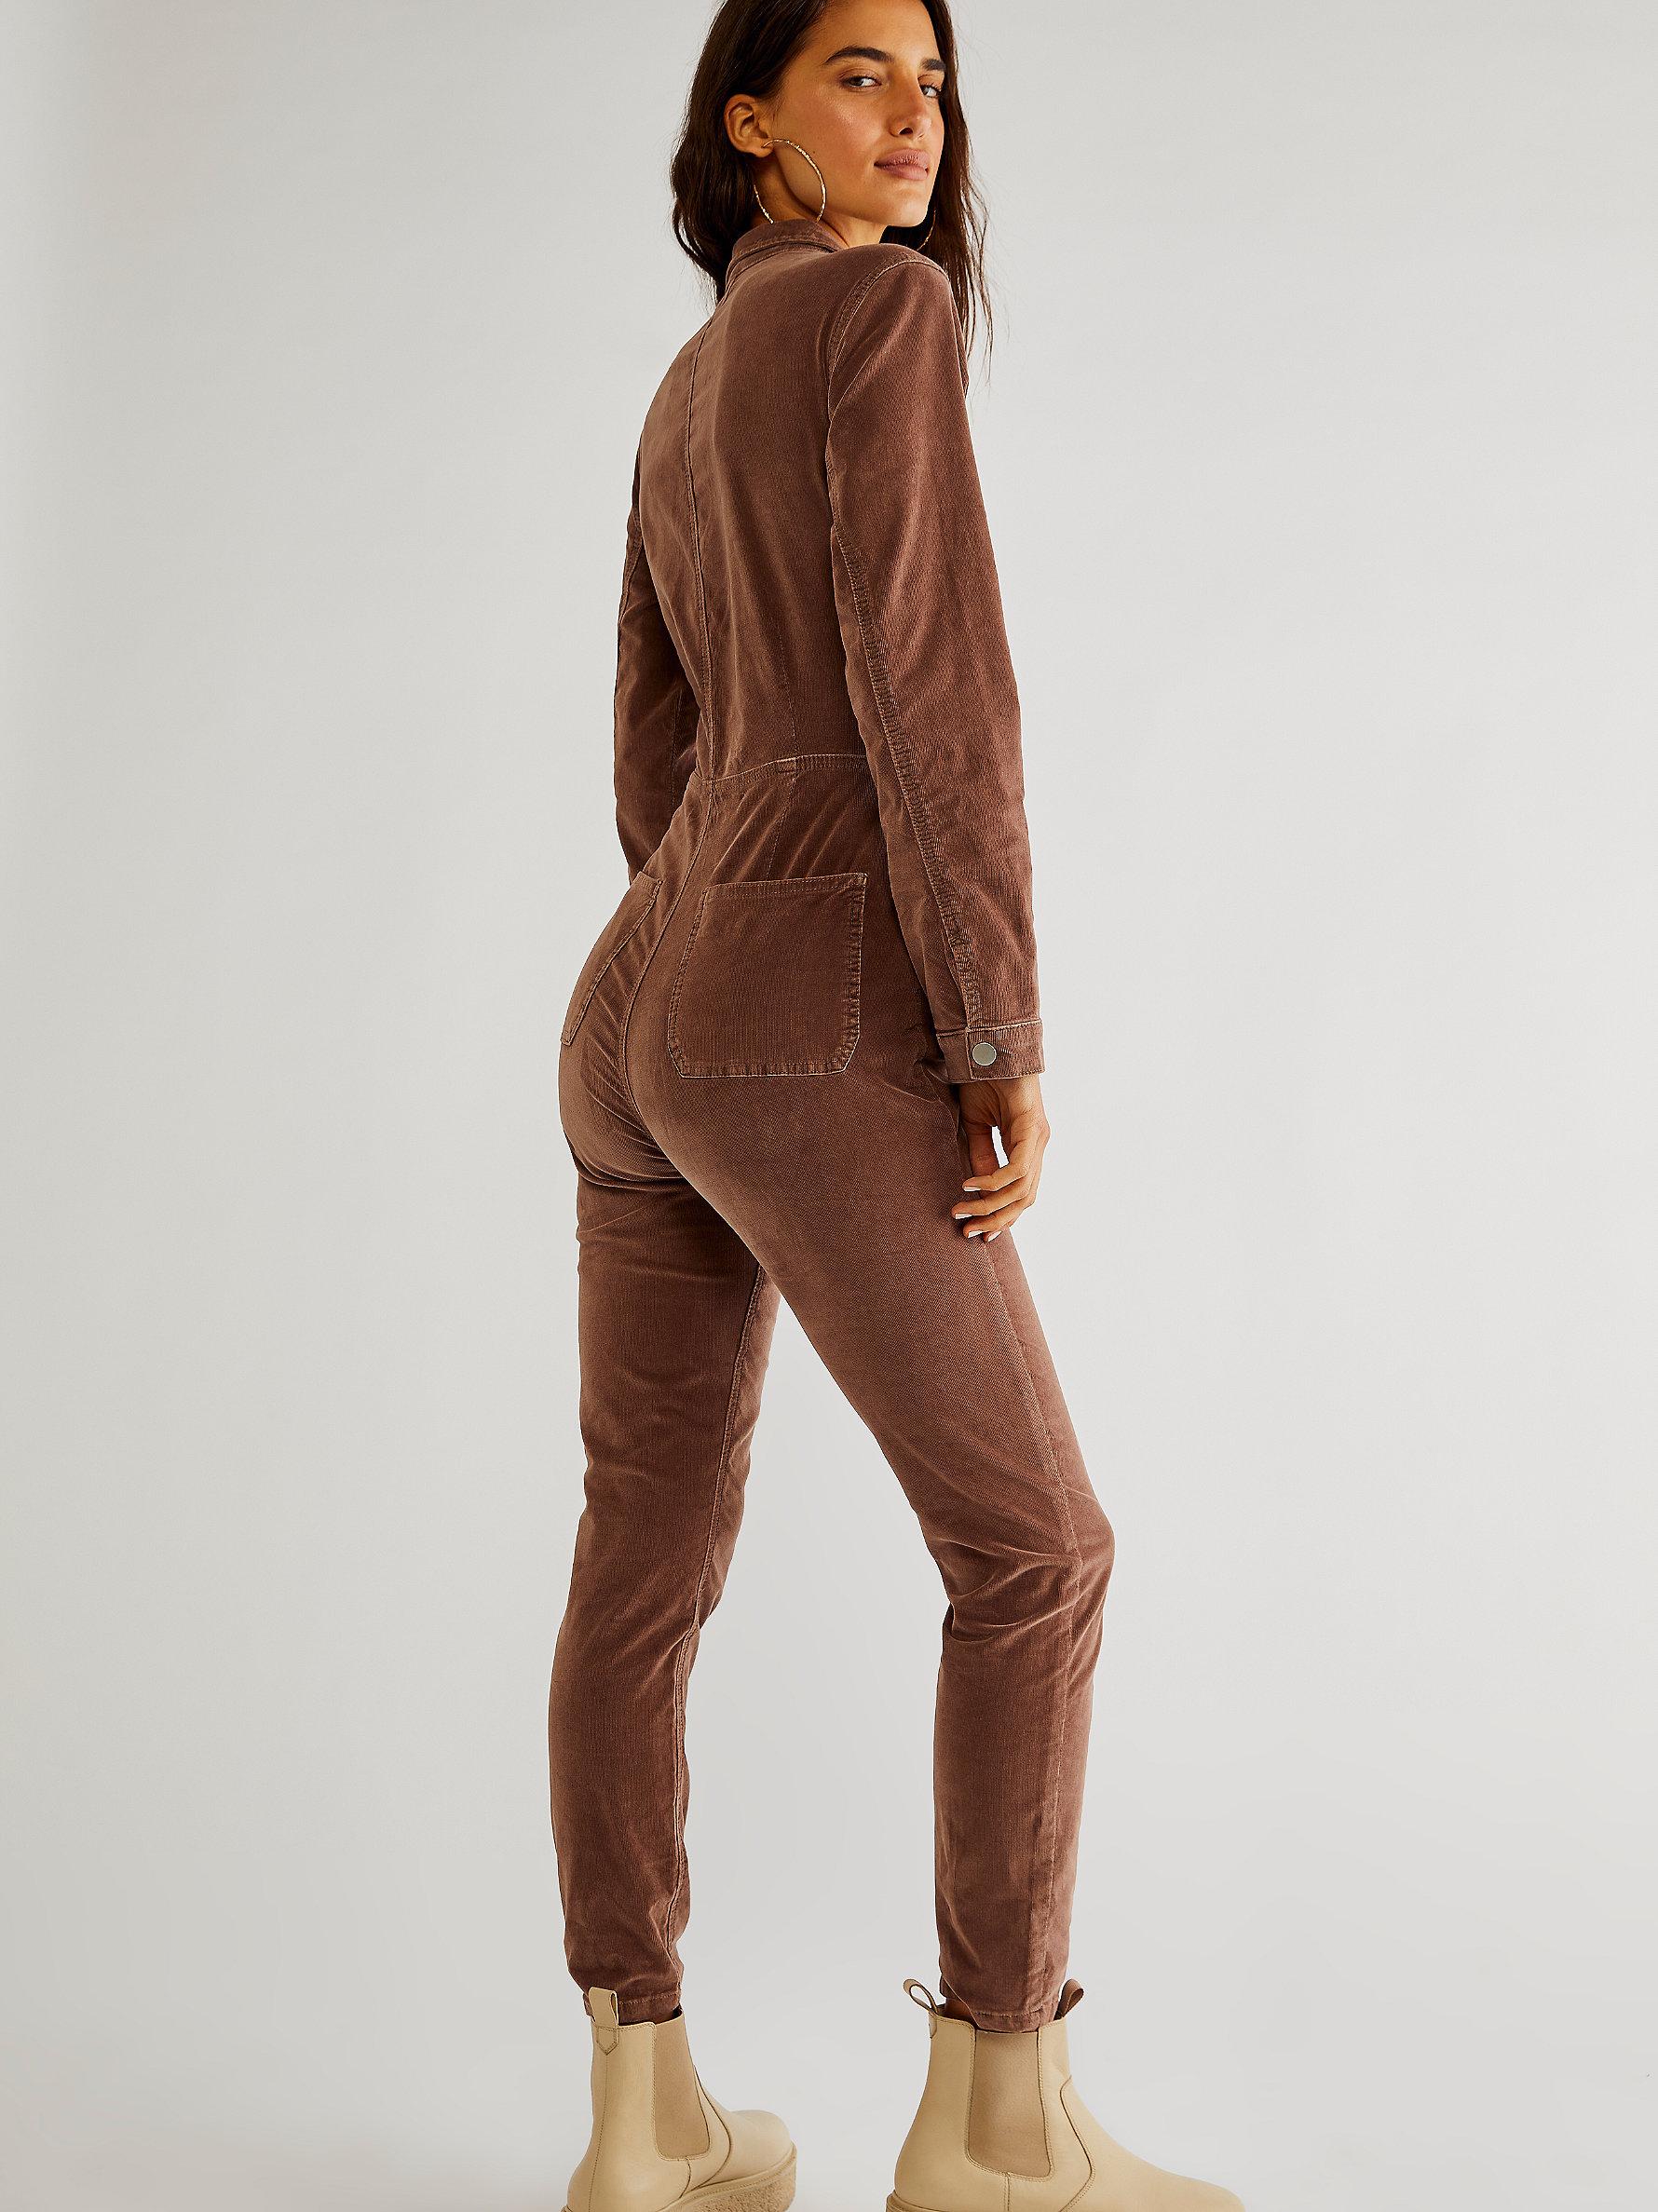 Free People Lennox Cord Jumpsuit in Brown | Lyst